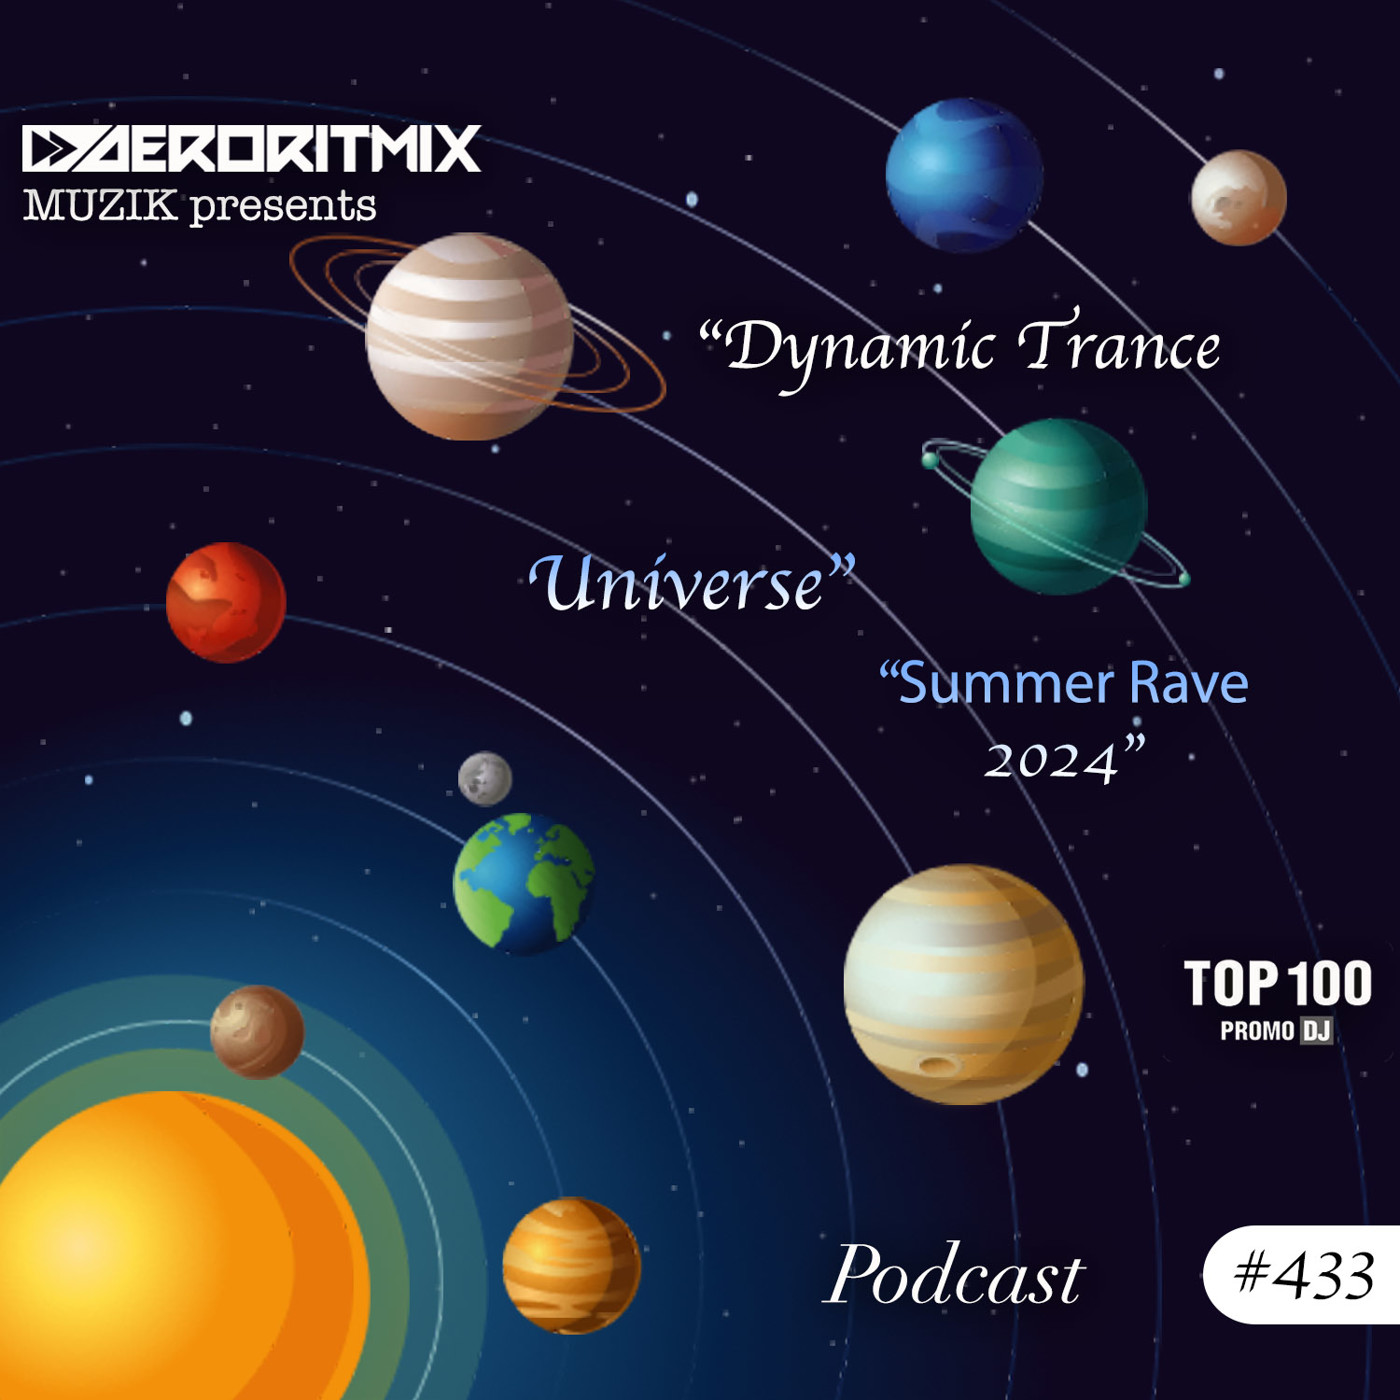 AER]O[RITMIX pres. #DTUPodcast "Summer Rave 2024" #433